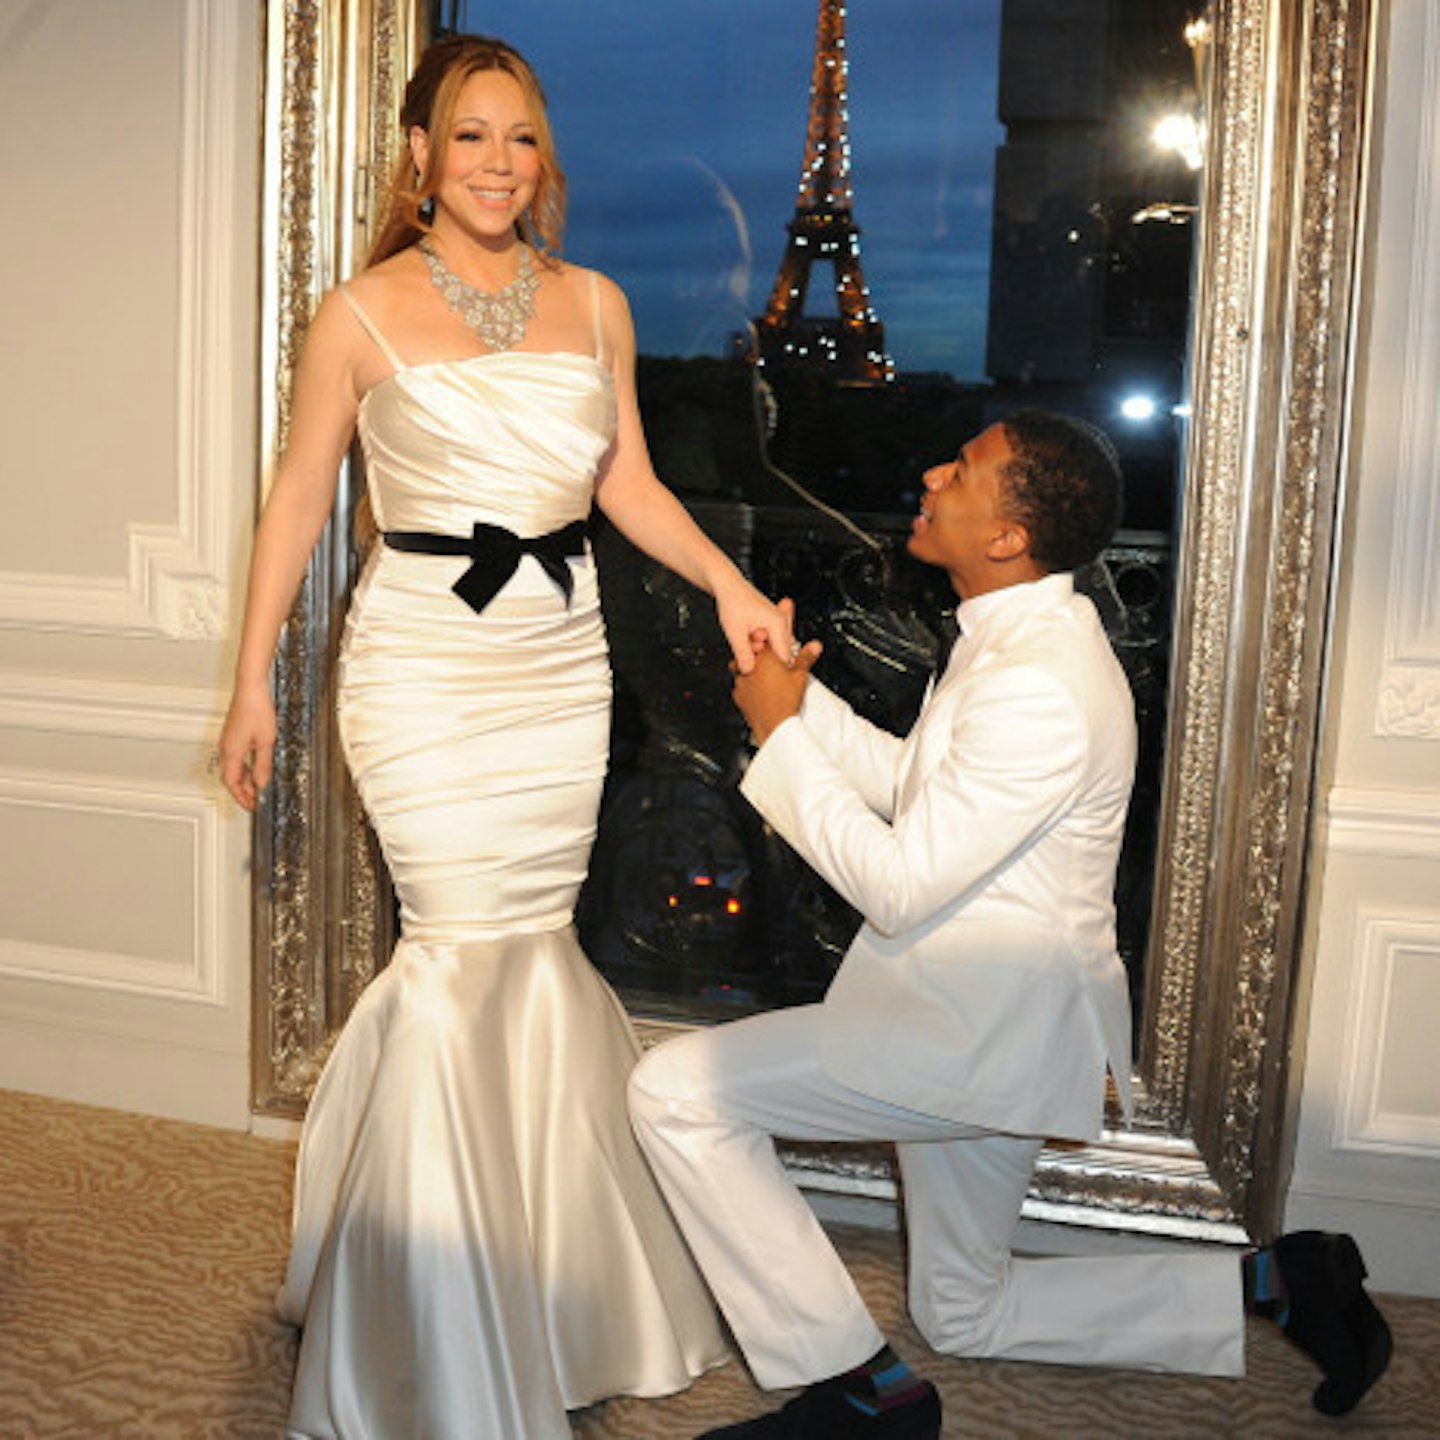 Mariah Carey and Nick Cannon, in happier times